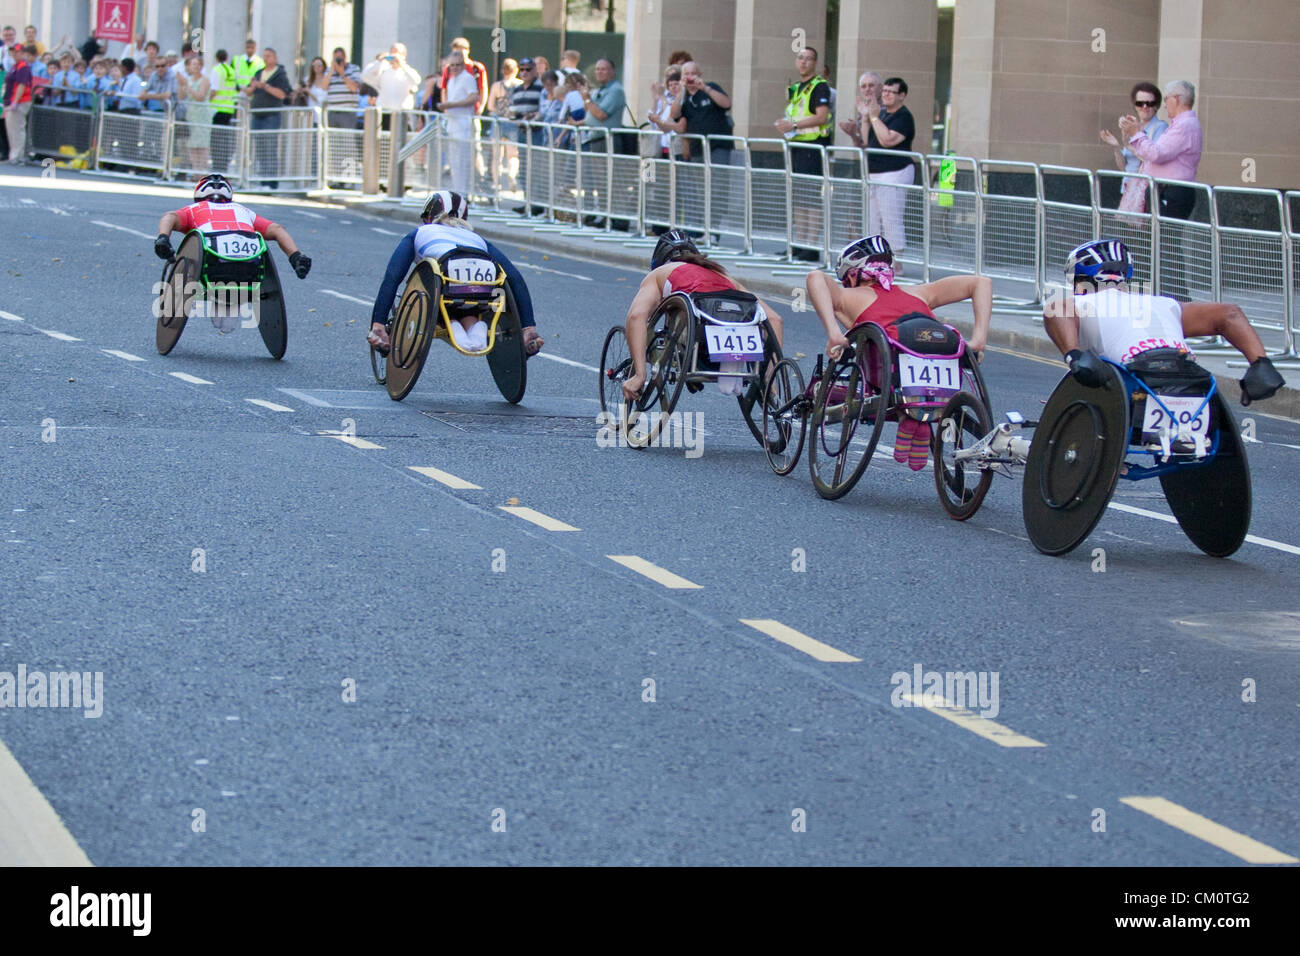 London, UK. 9th September 2012. Racing along Newgate Street in the City of London, left to right, Sandra Graf (Swiss, Gold Medal WInner), Shelly Woods (Team GB, Silver) , USA's Shirley Reilly (Gold Medal Winner), USA's Amanda McGrory (4th), unknown Stock Photo